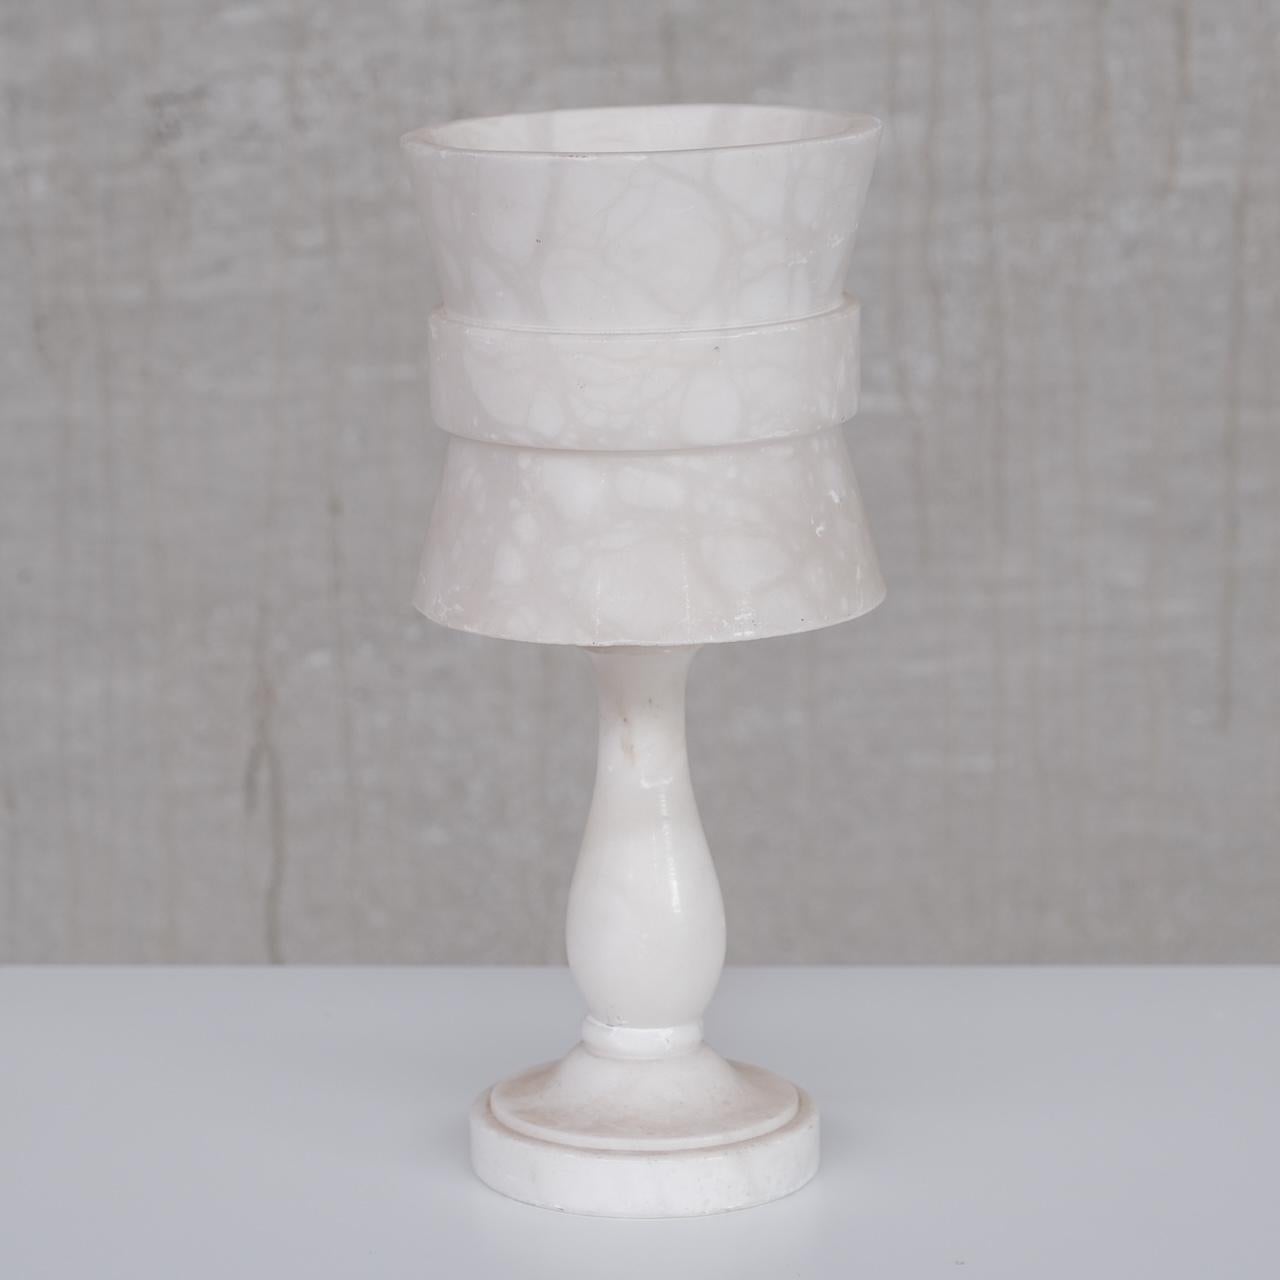 An alabaster table lamp. 

France, c1950s. 

Sourced in a cluster of seven varied style alabaster lamps. 

Price is for the single lamp. 

Some scuffs and wear commensurate with age but generally good condition. 

Since re-wired and PAT